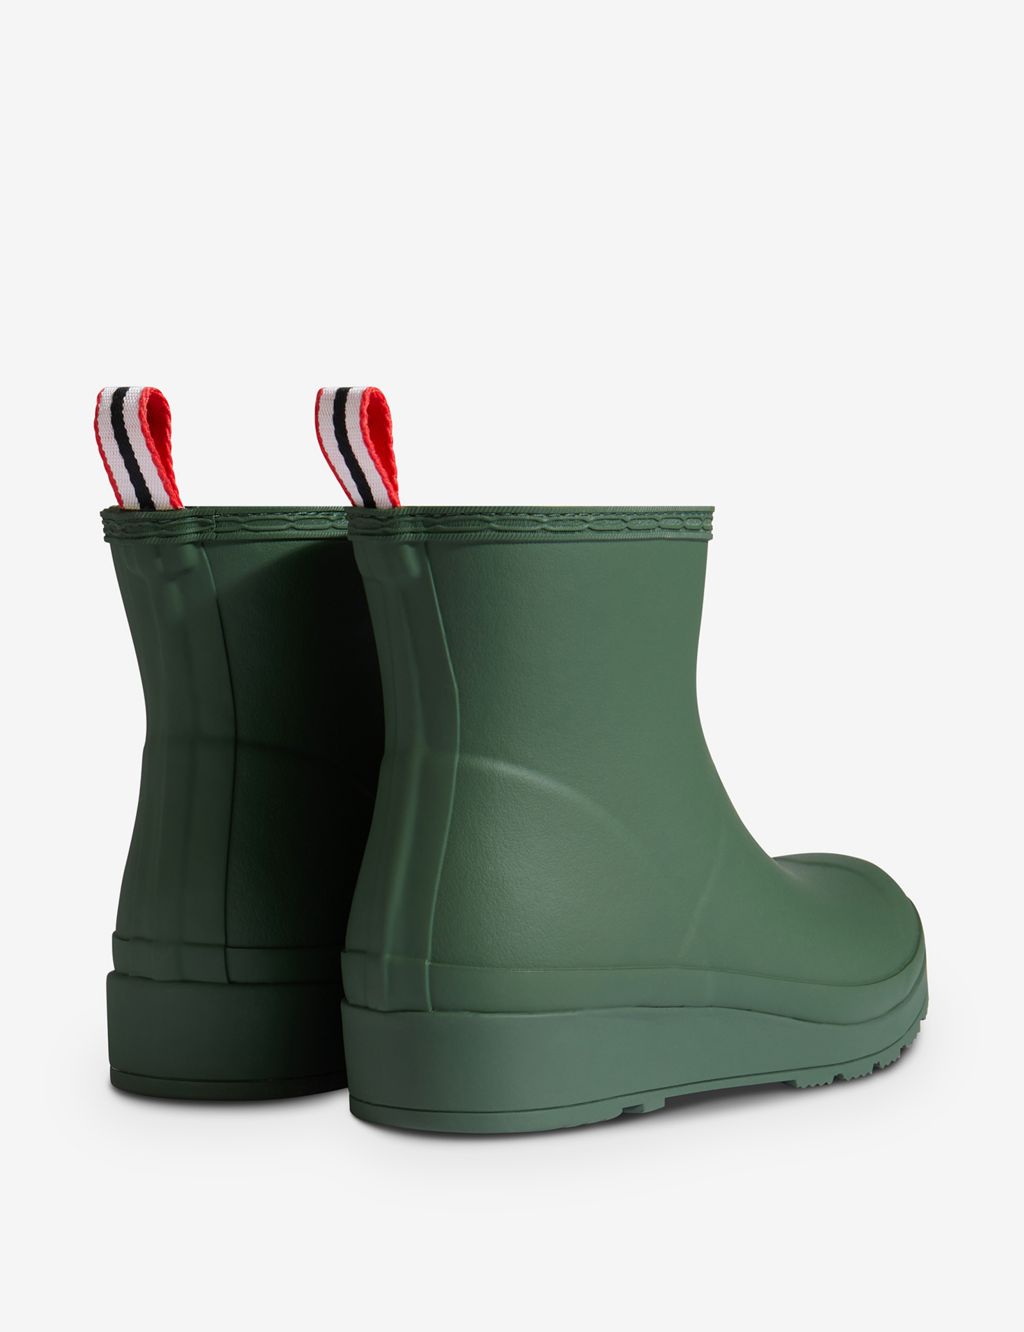 Short Insulated Wellies image 3